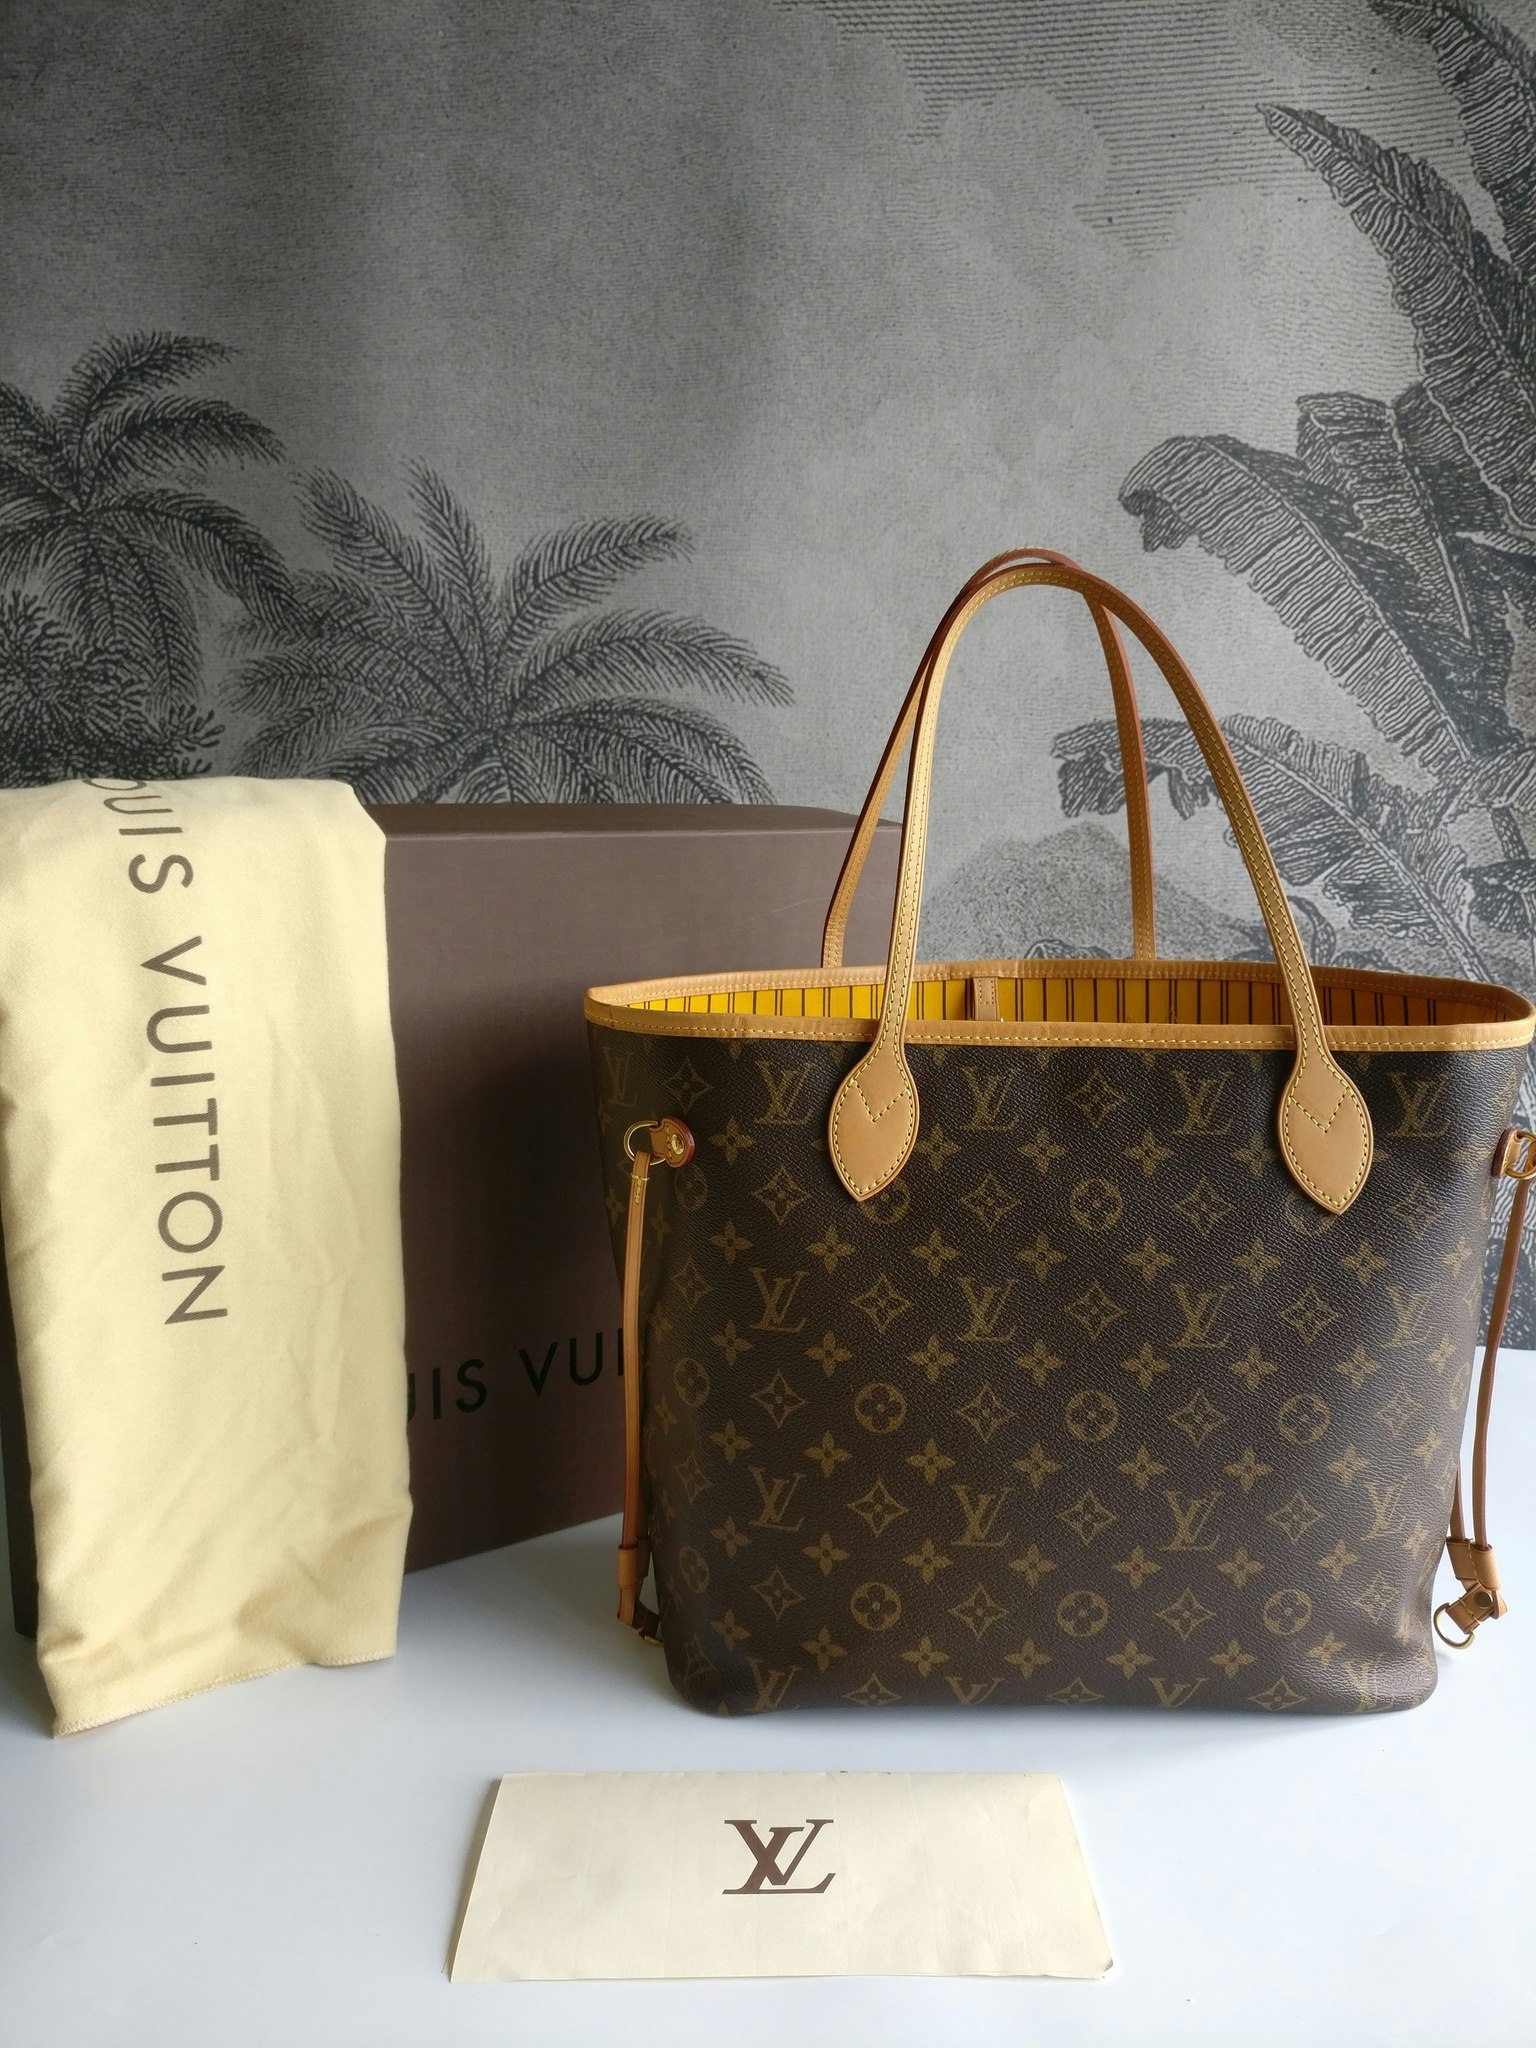 Louis Vuitton Neverfull MM mimosa limited edition - Good or Bag